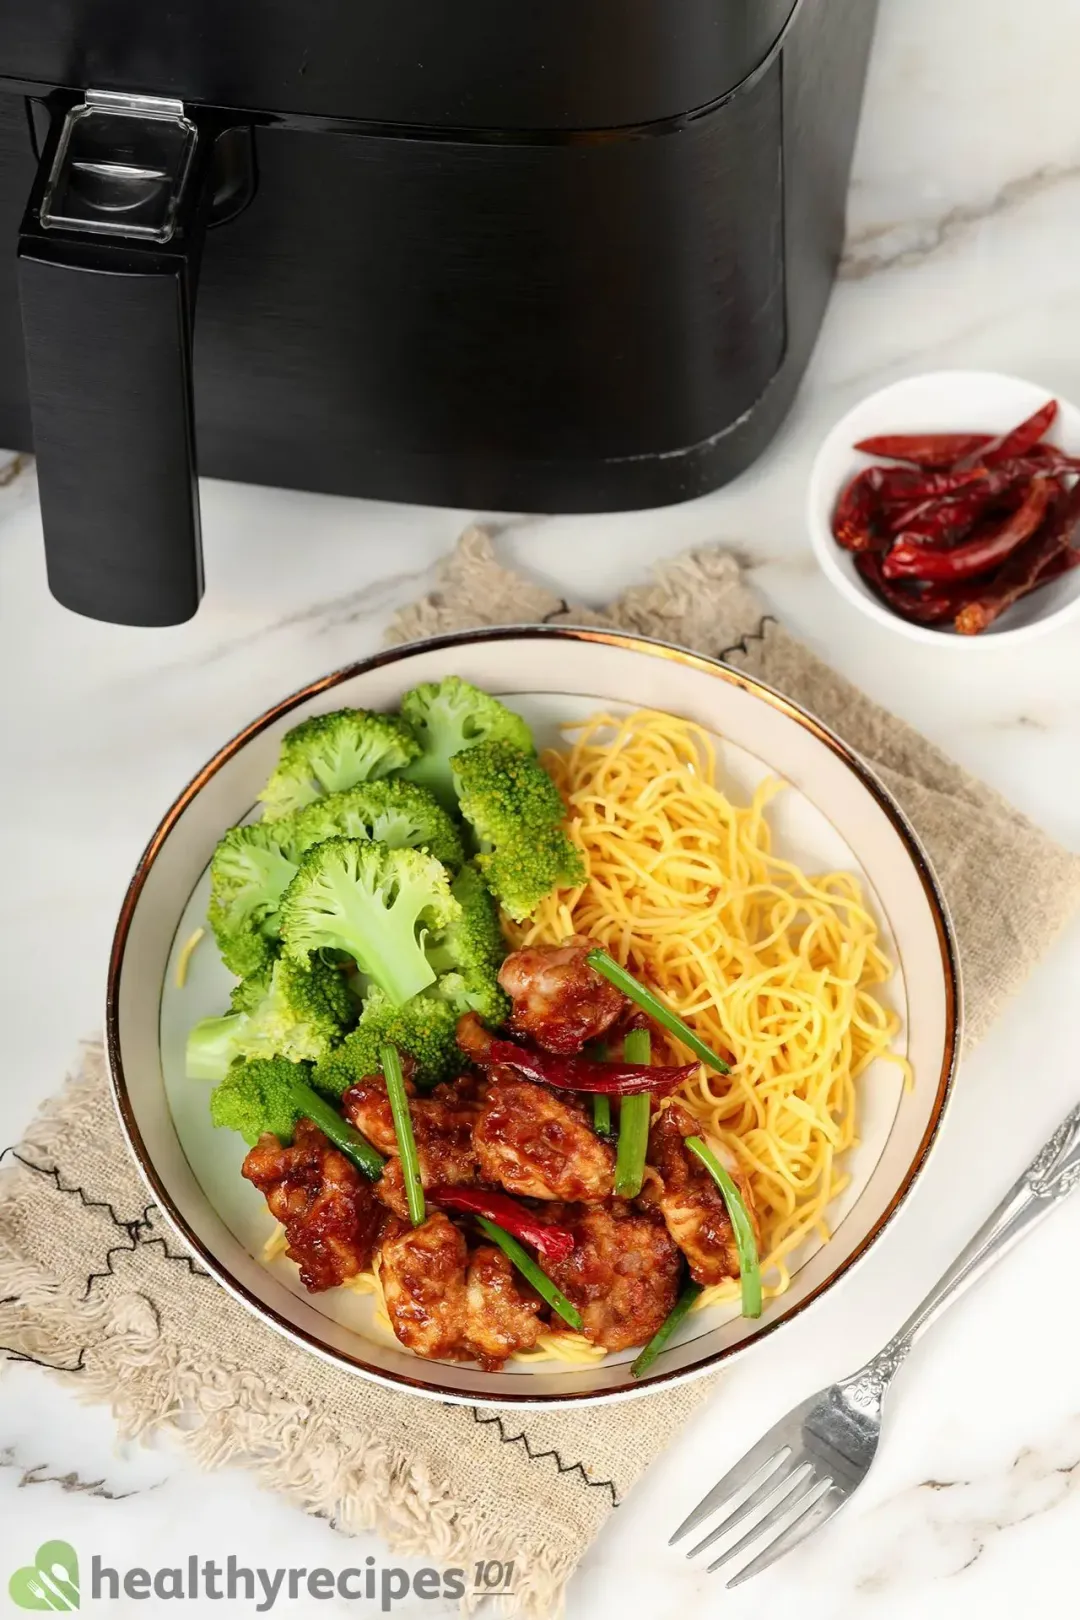 Is This Air Fryer Mongolian Chicken Recipe Healthy